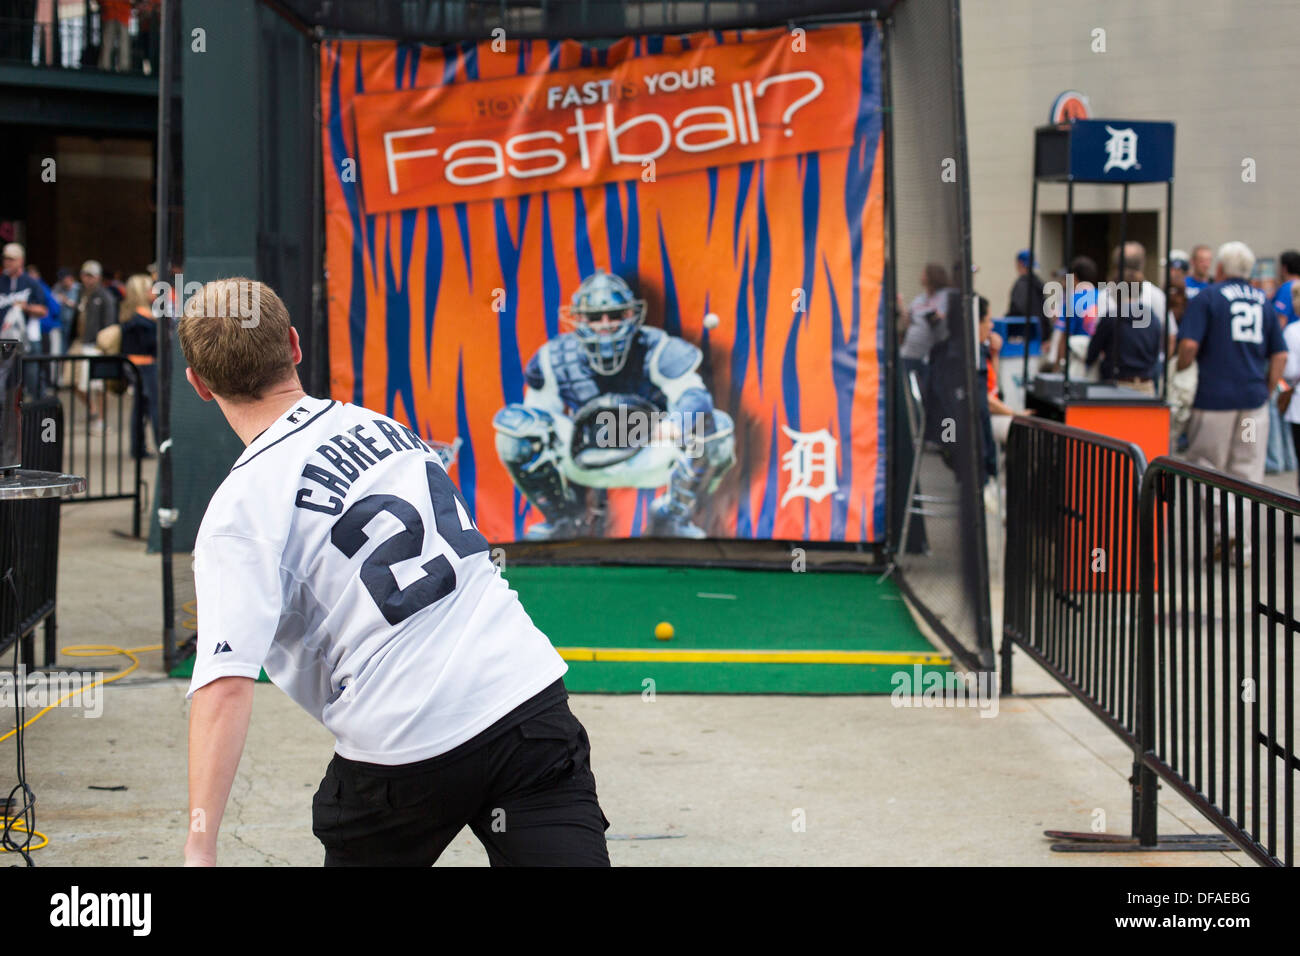 A Detroit Tigers fan tests his pitching arm before a game at Comerica Park Stock Photo